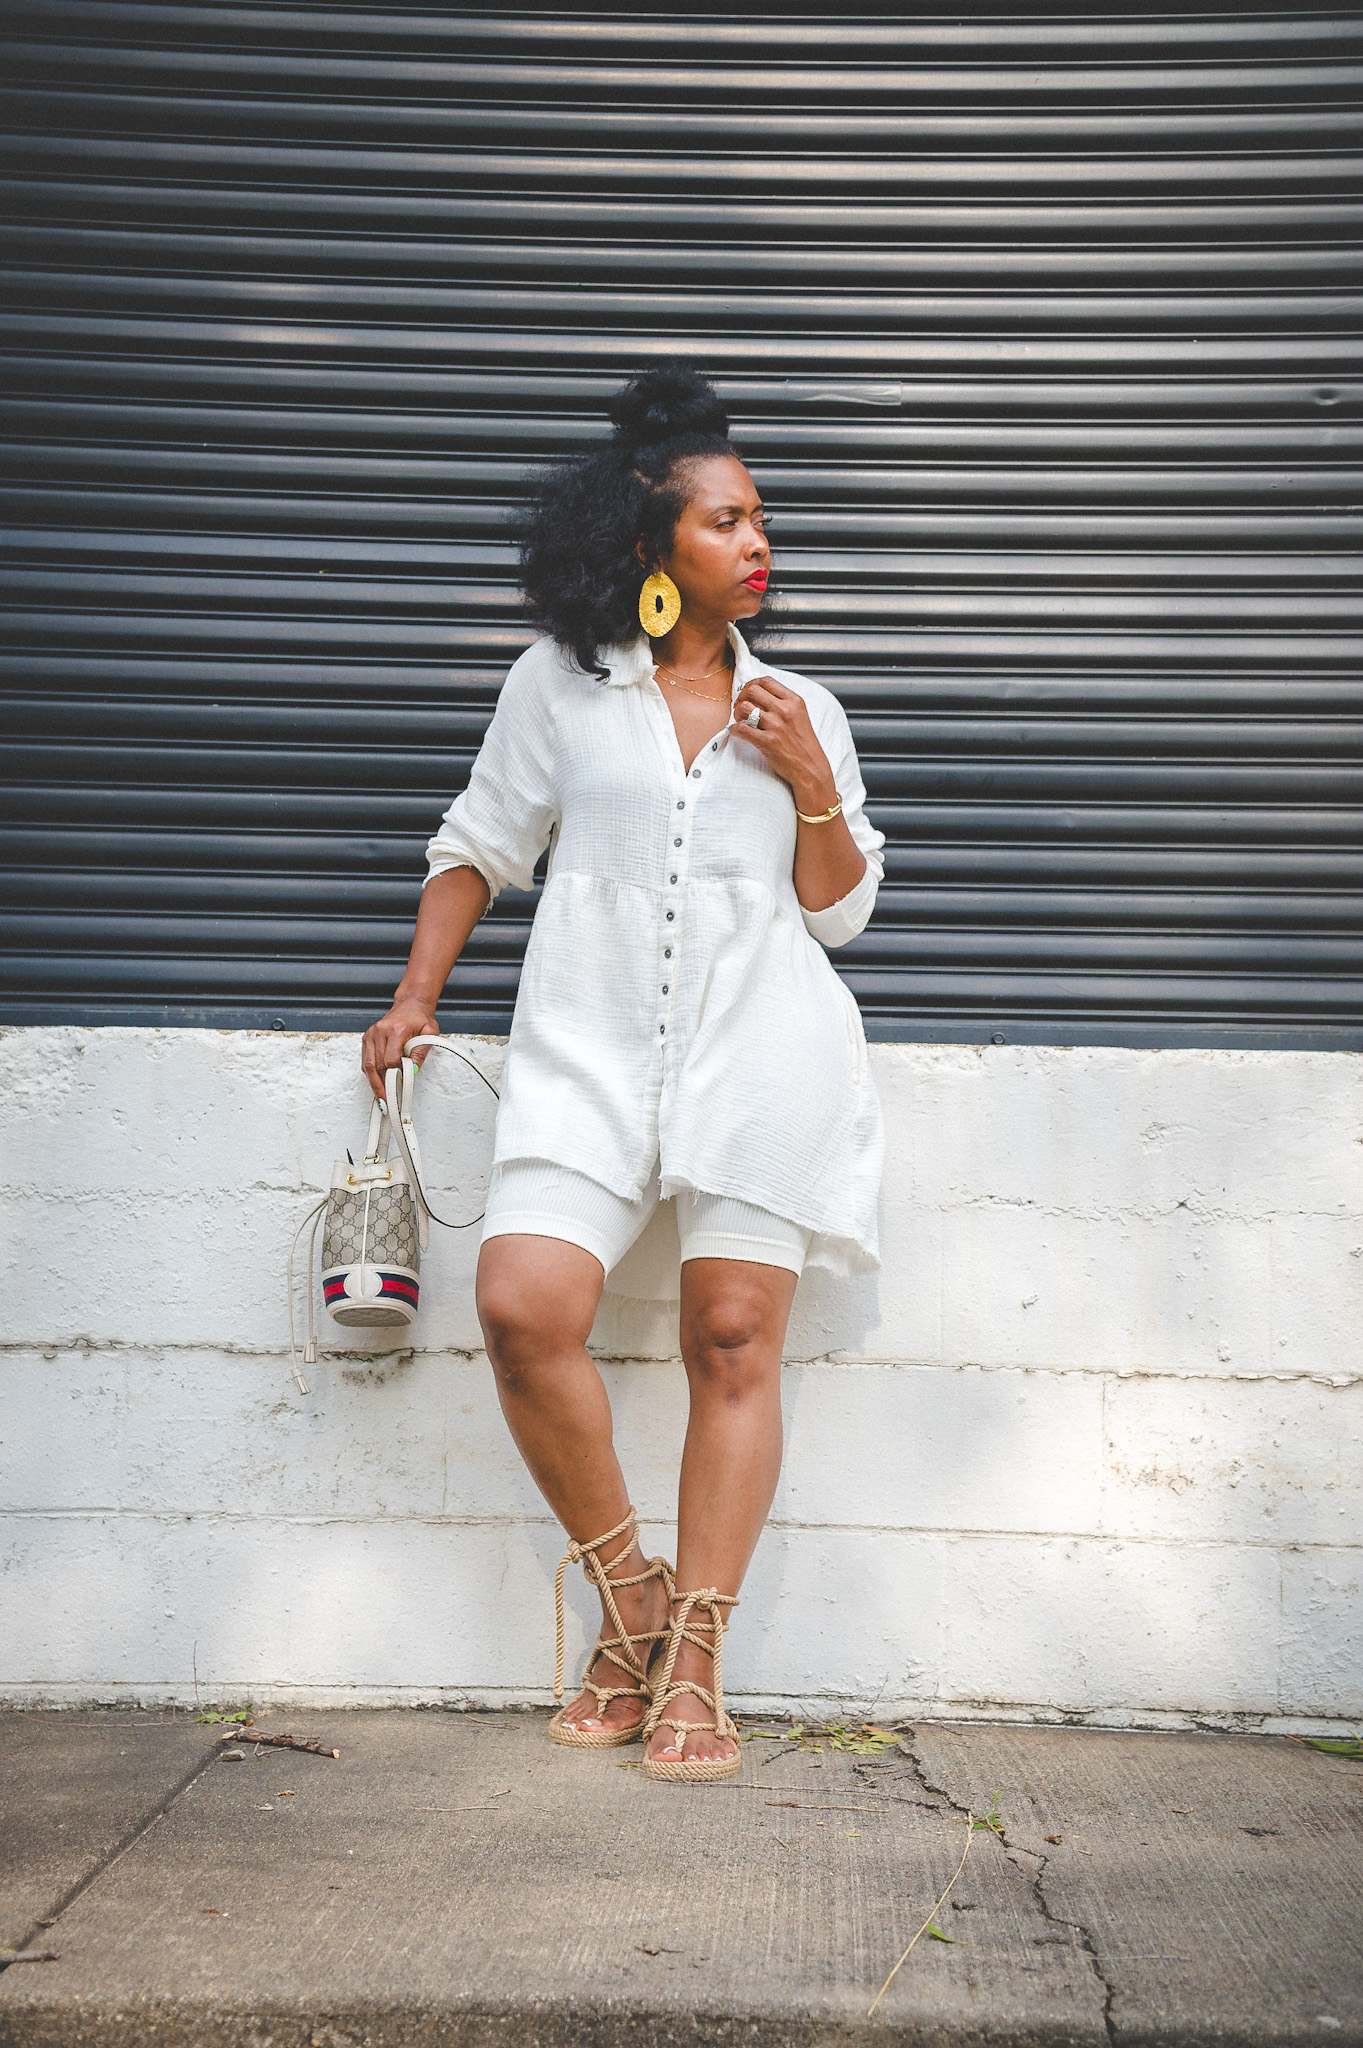 sweenee style,RELAXING WEEKEND OUTFIT IDEAS, indianapolis style influencer, content creator, indianapolis fashion blog, indiana blogger, black girls who blog, black influencer, summer outfit idea, summer outfits